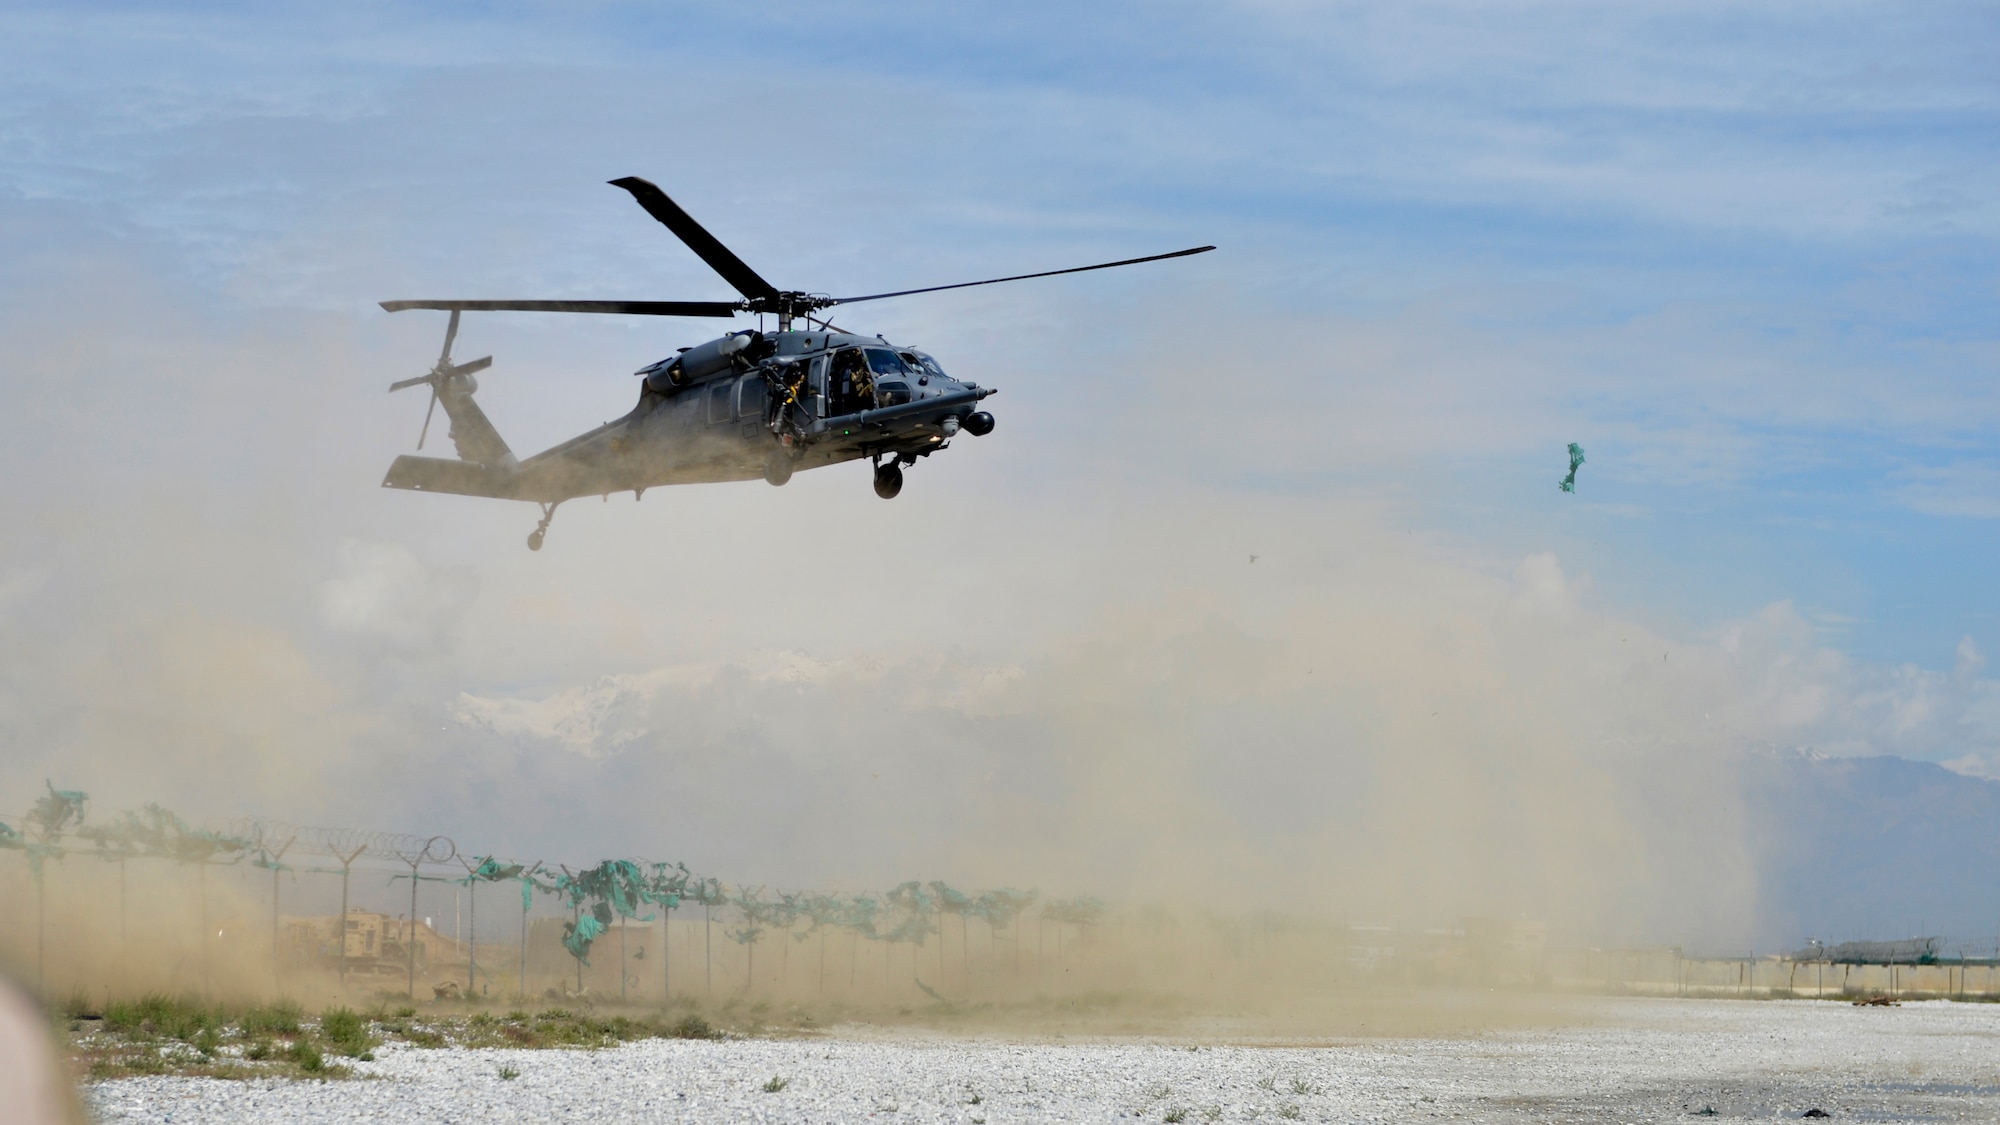 A U.S. Air Force HH-60G Pave Hawk approaches a landing zone to pick up simulated casualties during a training exercise at Bagram Airfield, Afghanistan May 5, 2014. The scenario simulated a vehicle striking an Improvised Explosive Device. During the training, rescue crews flew on HH-60G Pave Hawk helicopters to the simulated point of injury, provided security, treated patients, prepared them for travel, and safely departed the area.  The rescue crew is deployed from Moody Air Force Base, Ga.  (U.S. Air Force photo by Staff Sgt. Evelyn Chavez/Released)